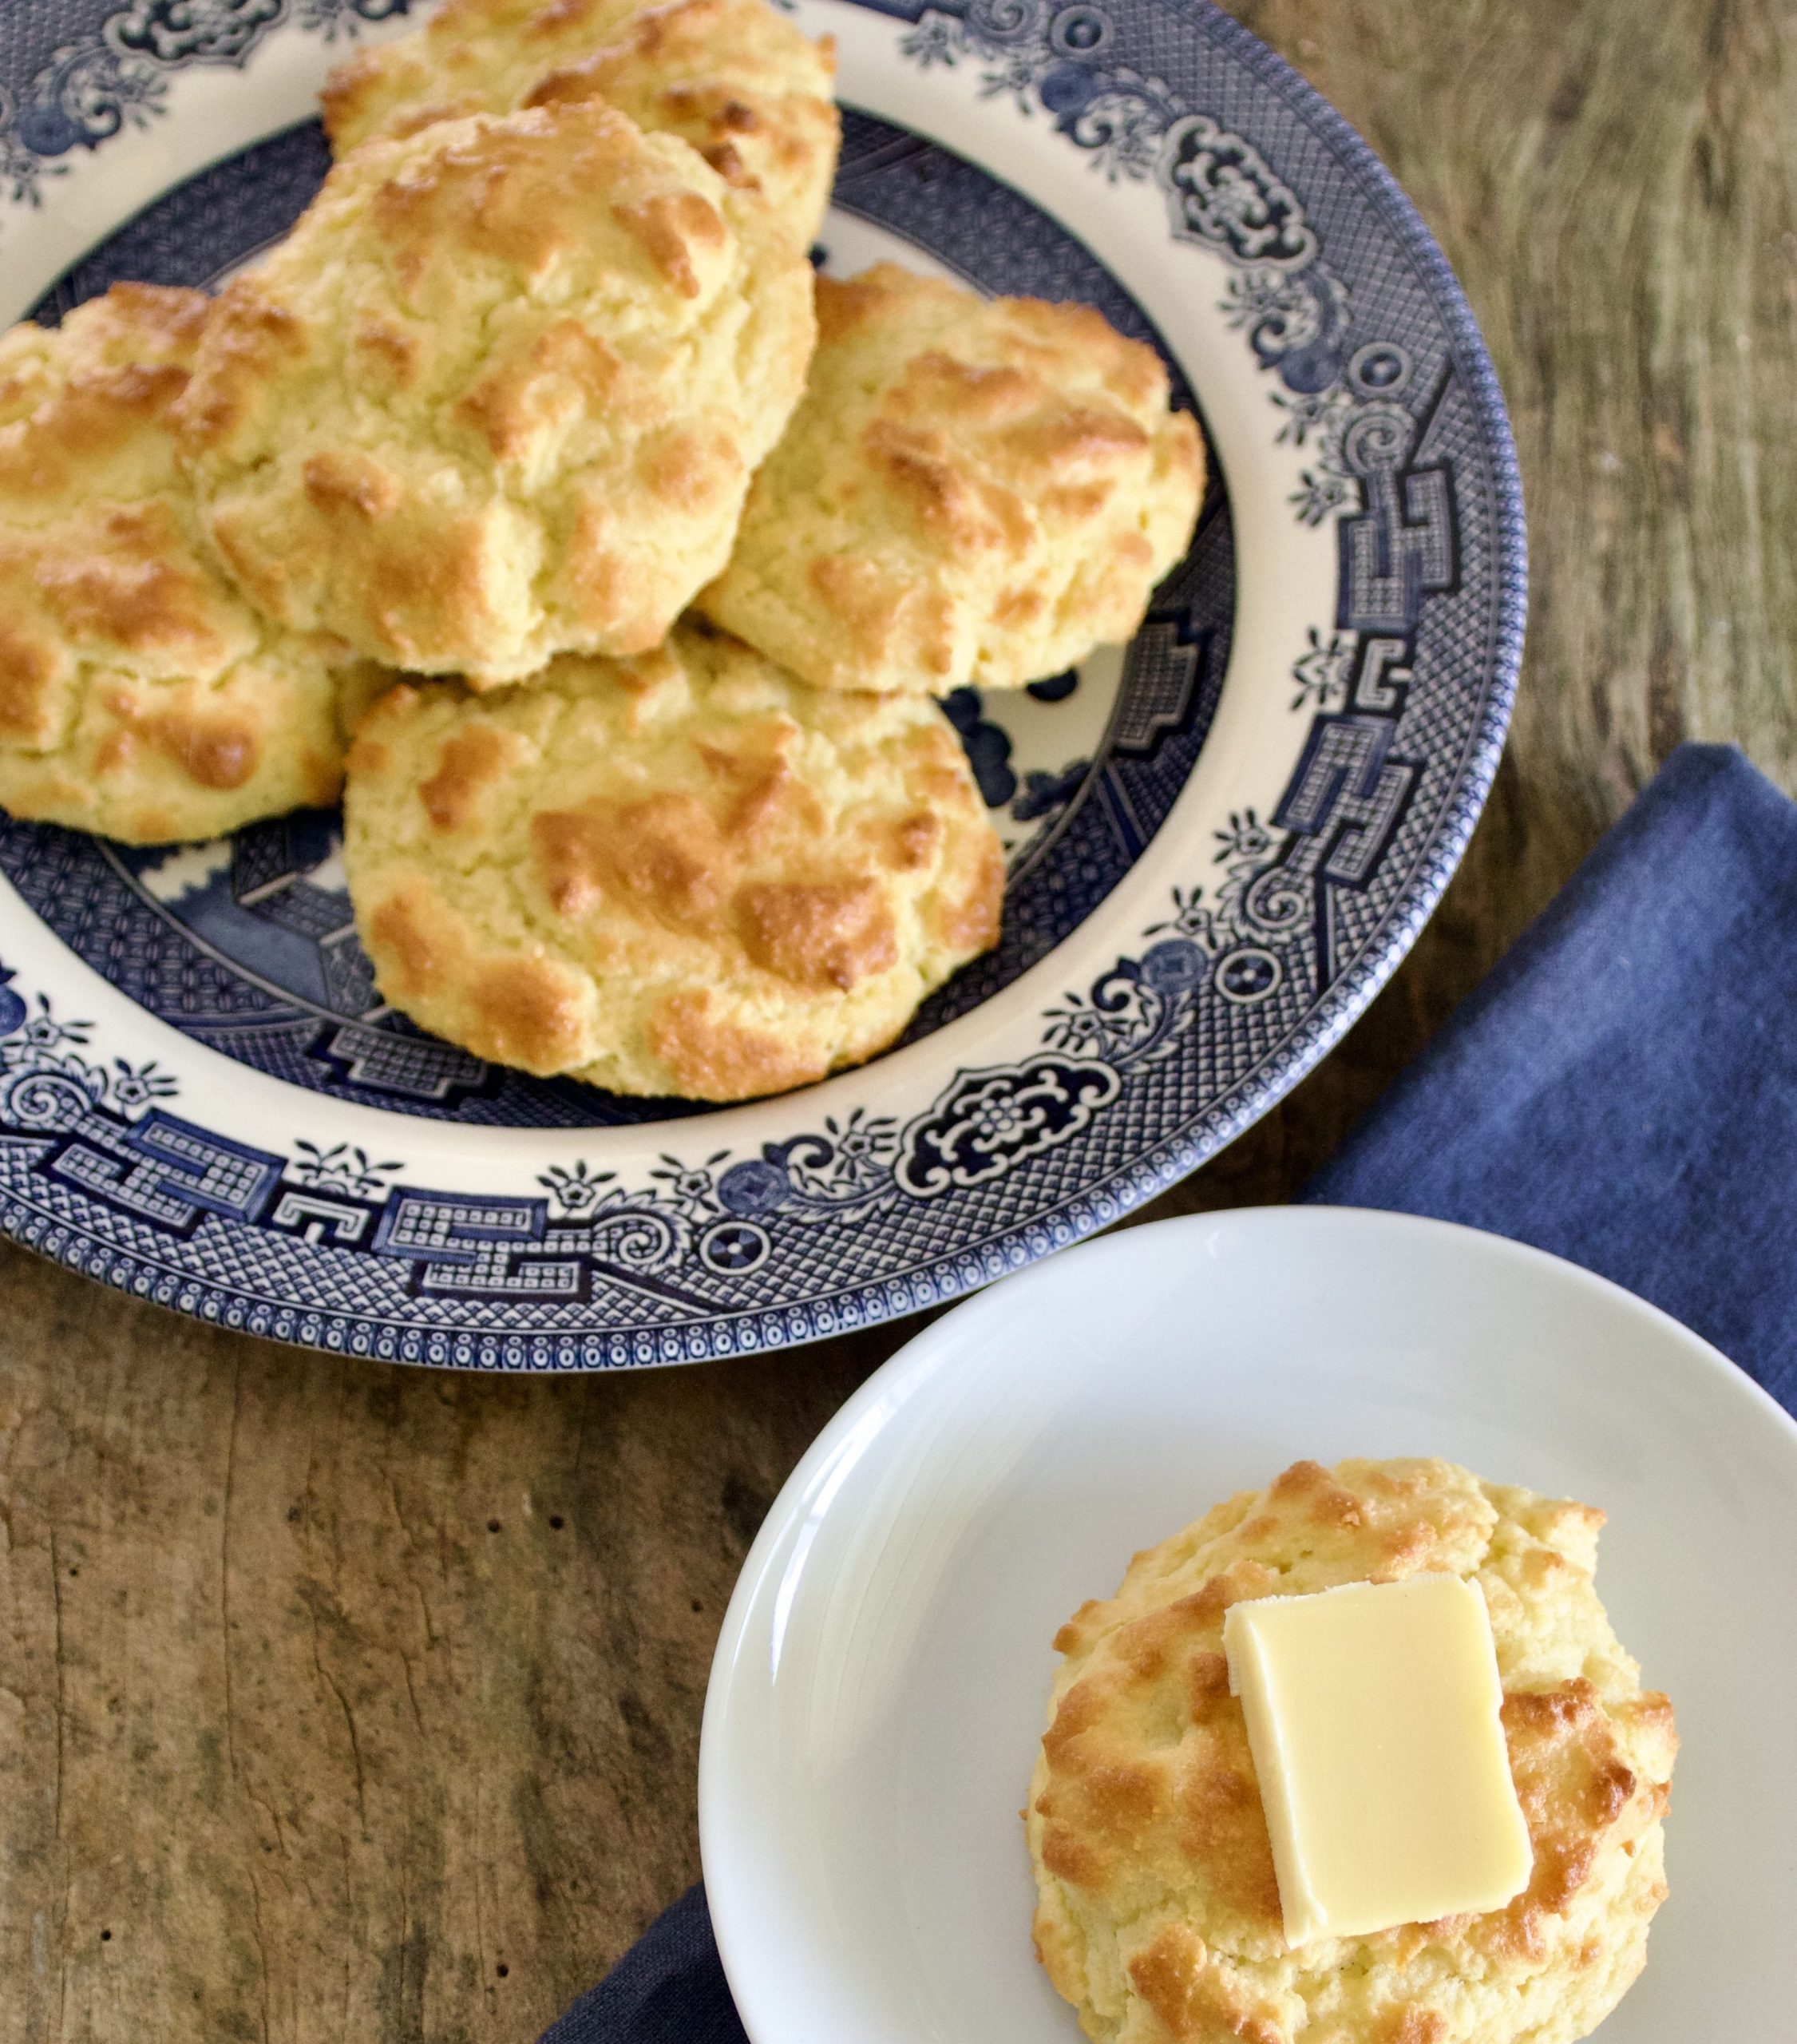 drop biscuits on a blue and white plate. one drop biscuit topped with a pat of butter on a small white plate. the plate is sitting on a blue napkin.